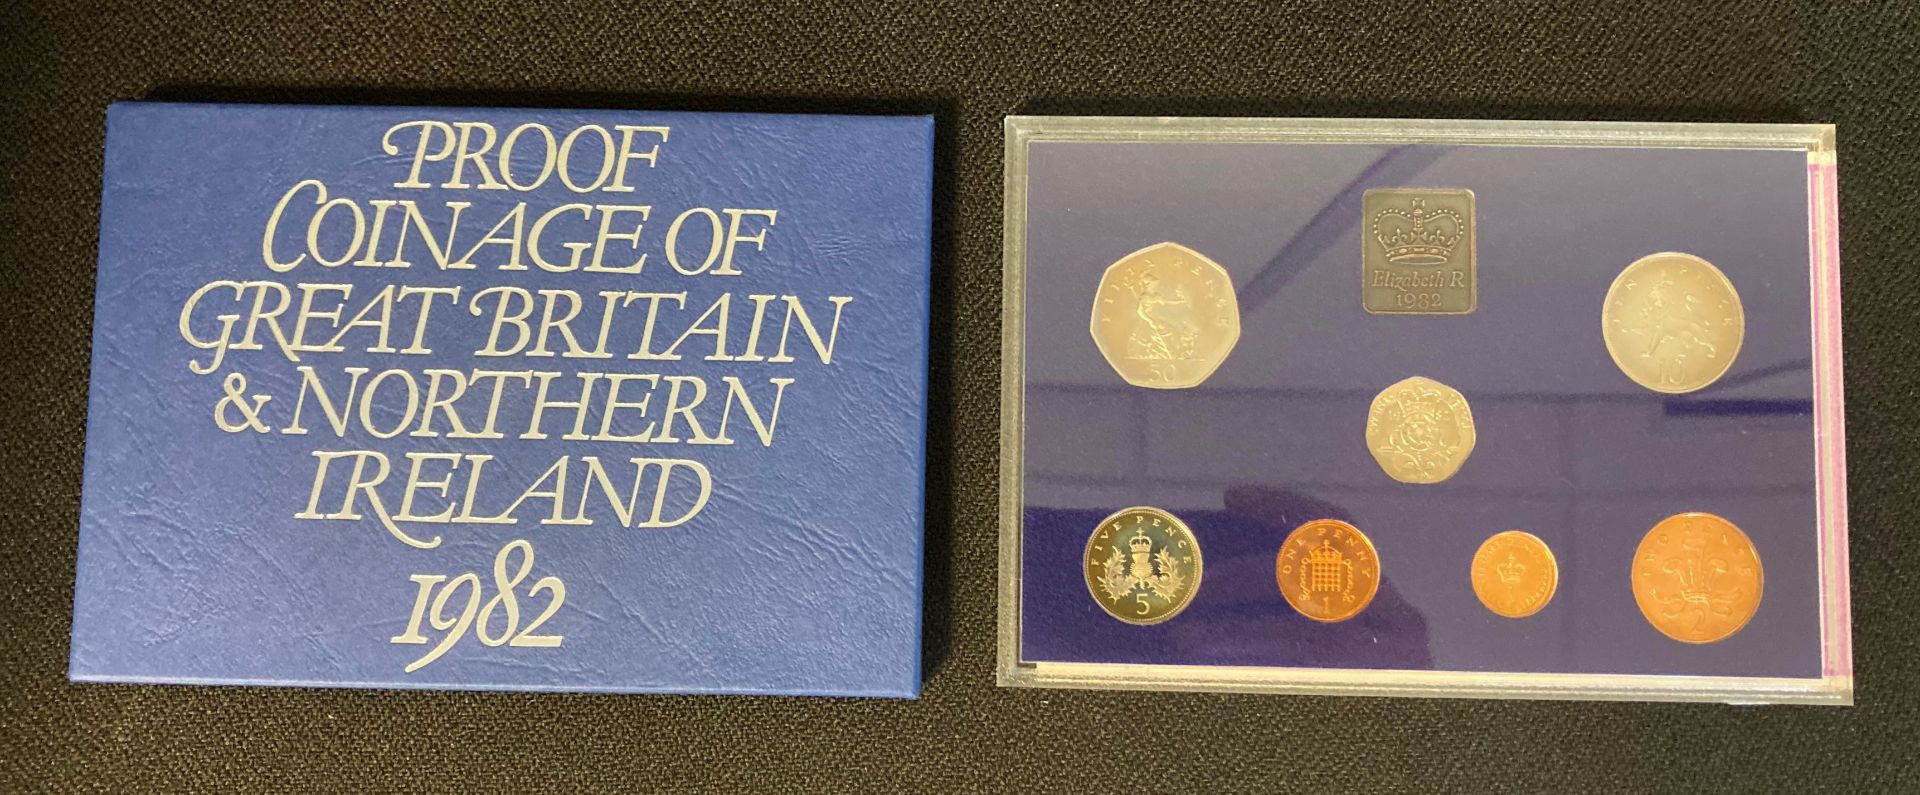 A Royal Mint Coinage of Great Britain and Northern Ireland 1982 proof set in original blue envelope